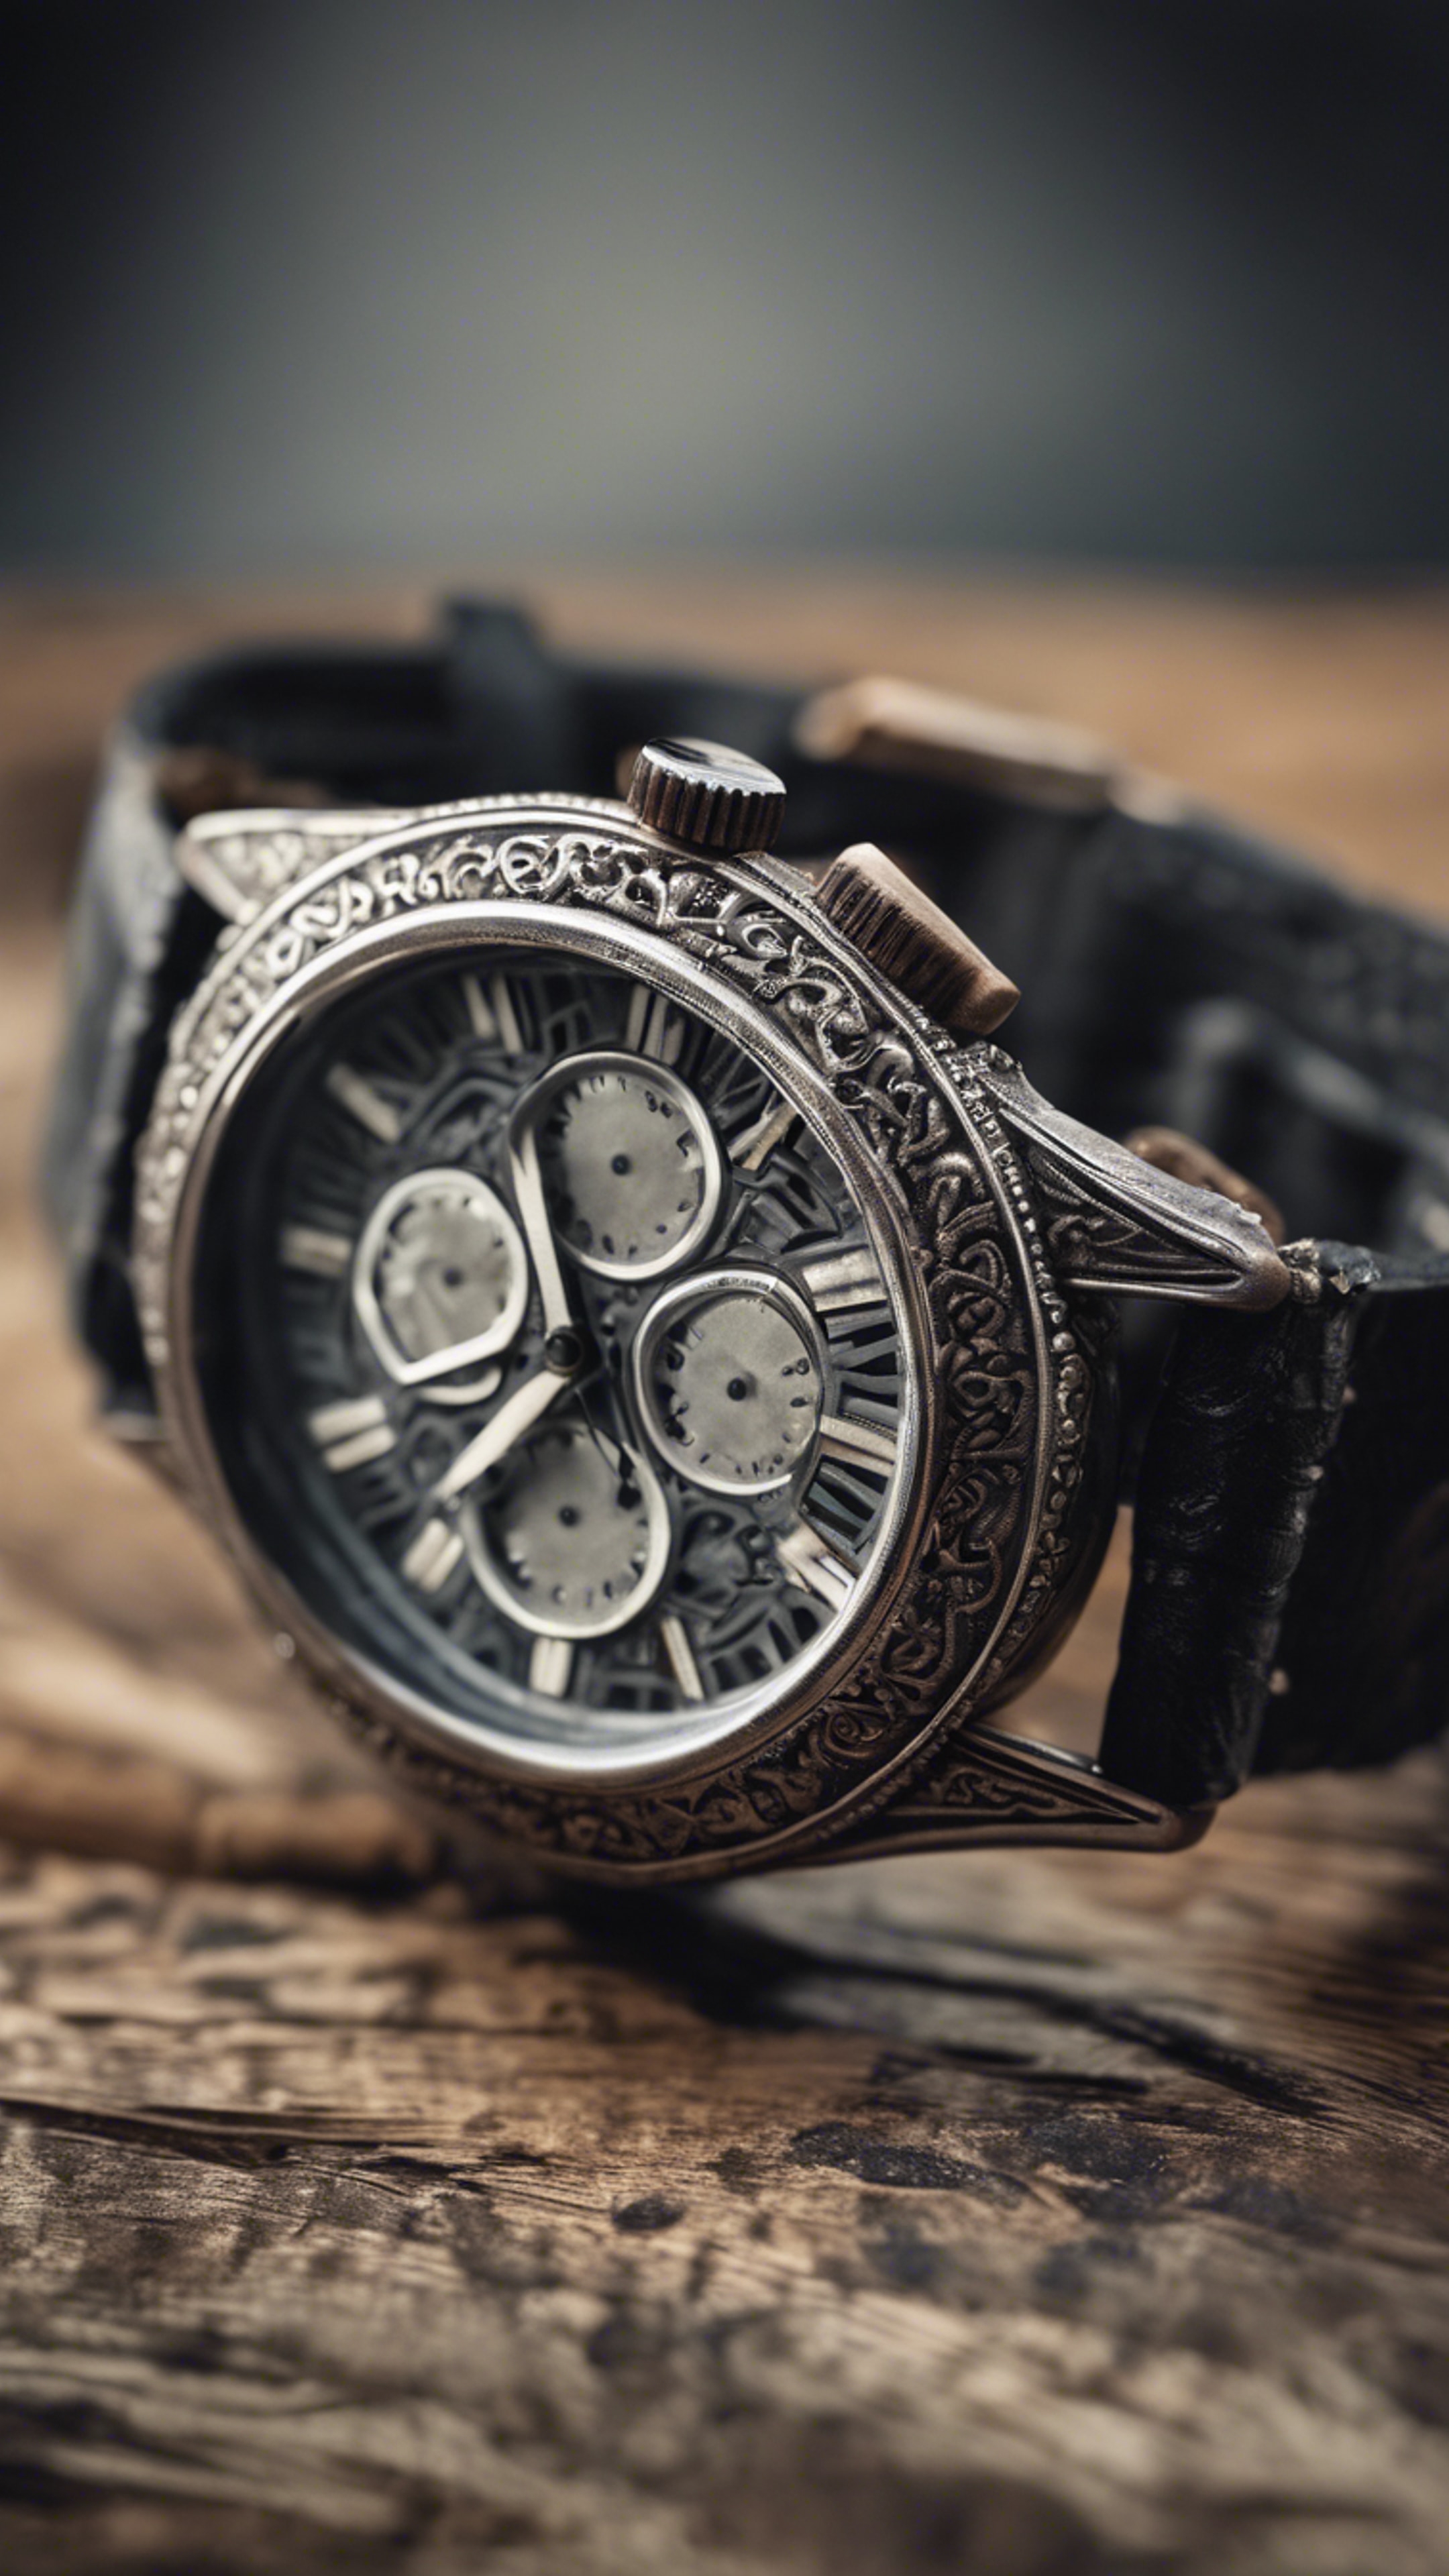 An antique, rustic, black and gray wristwatch with intricate details in its design. 벽지[fa36b50287764cf98f6d]